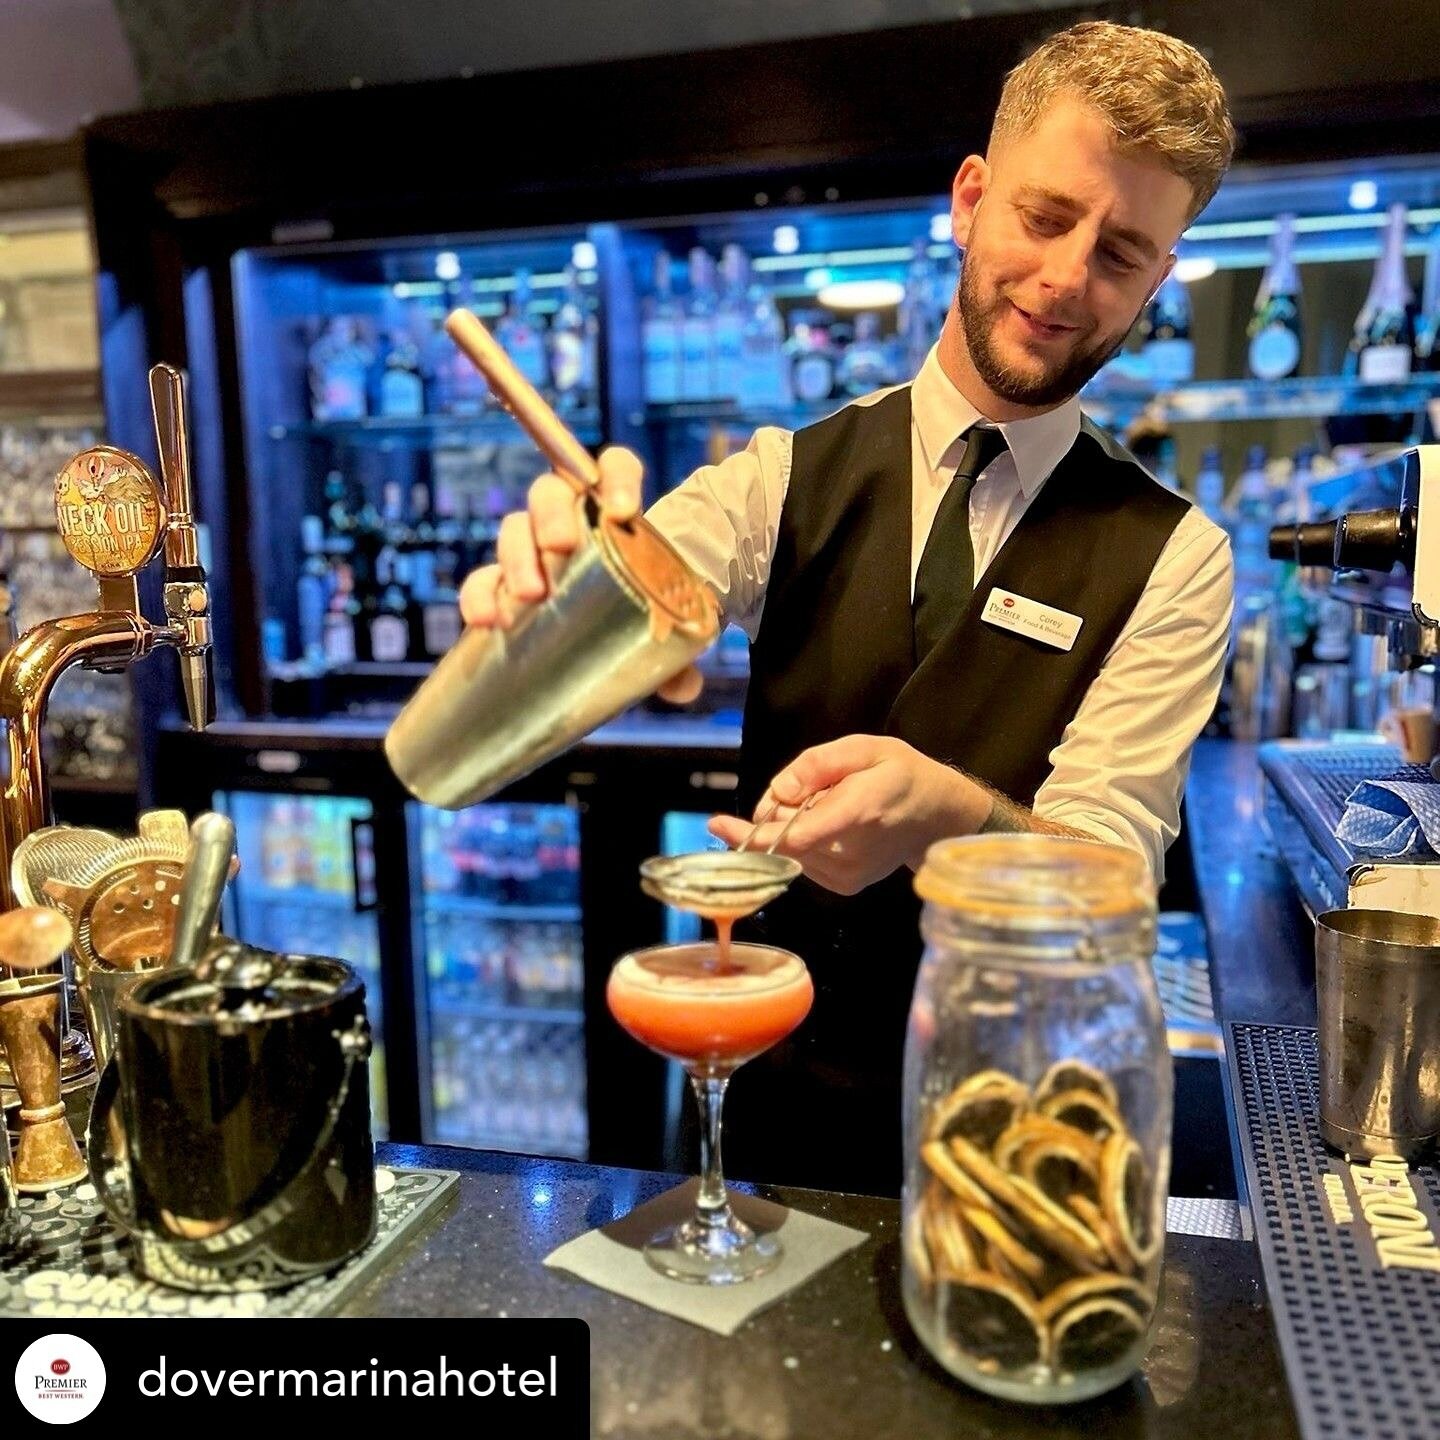 Posted @withregram &bull; @dovermarinahotel Robert, casually practicing his double-straining technique ahead of World Bartender Day!🍸🍓🌿

Don&rsquo;t forget, on Saturday 24th February we&rsquo;ll be celebrating World Bartender Day here at the hotel